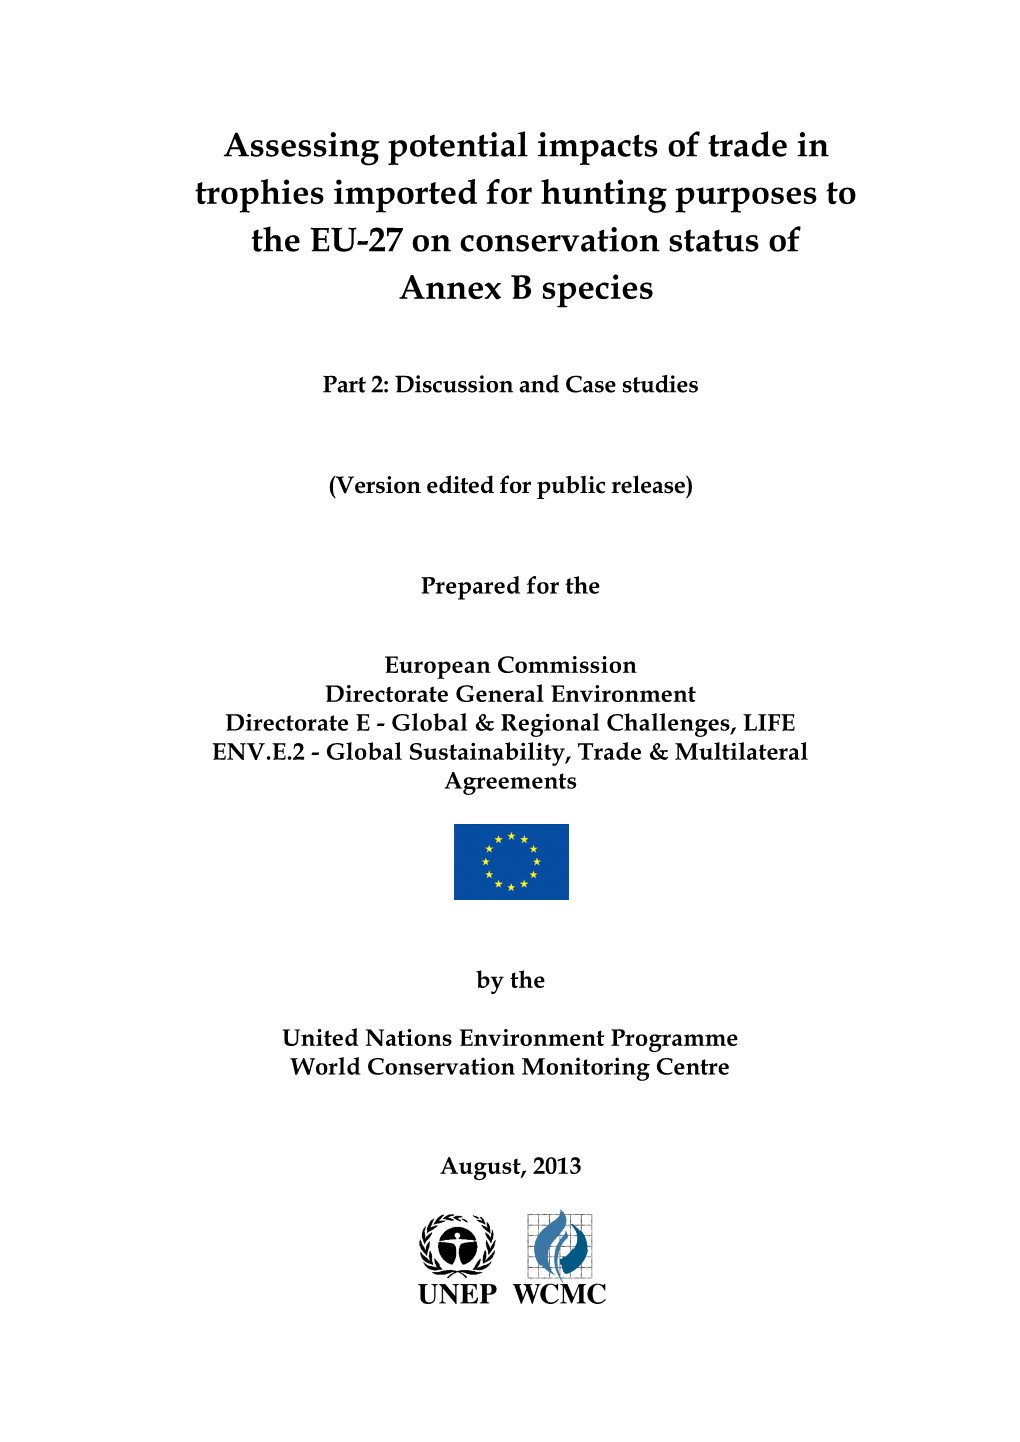 Assessing Potential Impacts of Trade in Trophies Imported for Hunting Purposes to the EU-27 on Conservation Status of Annex B Species